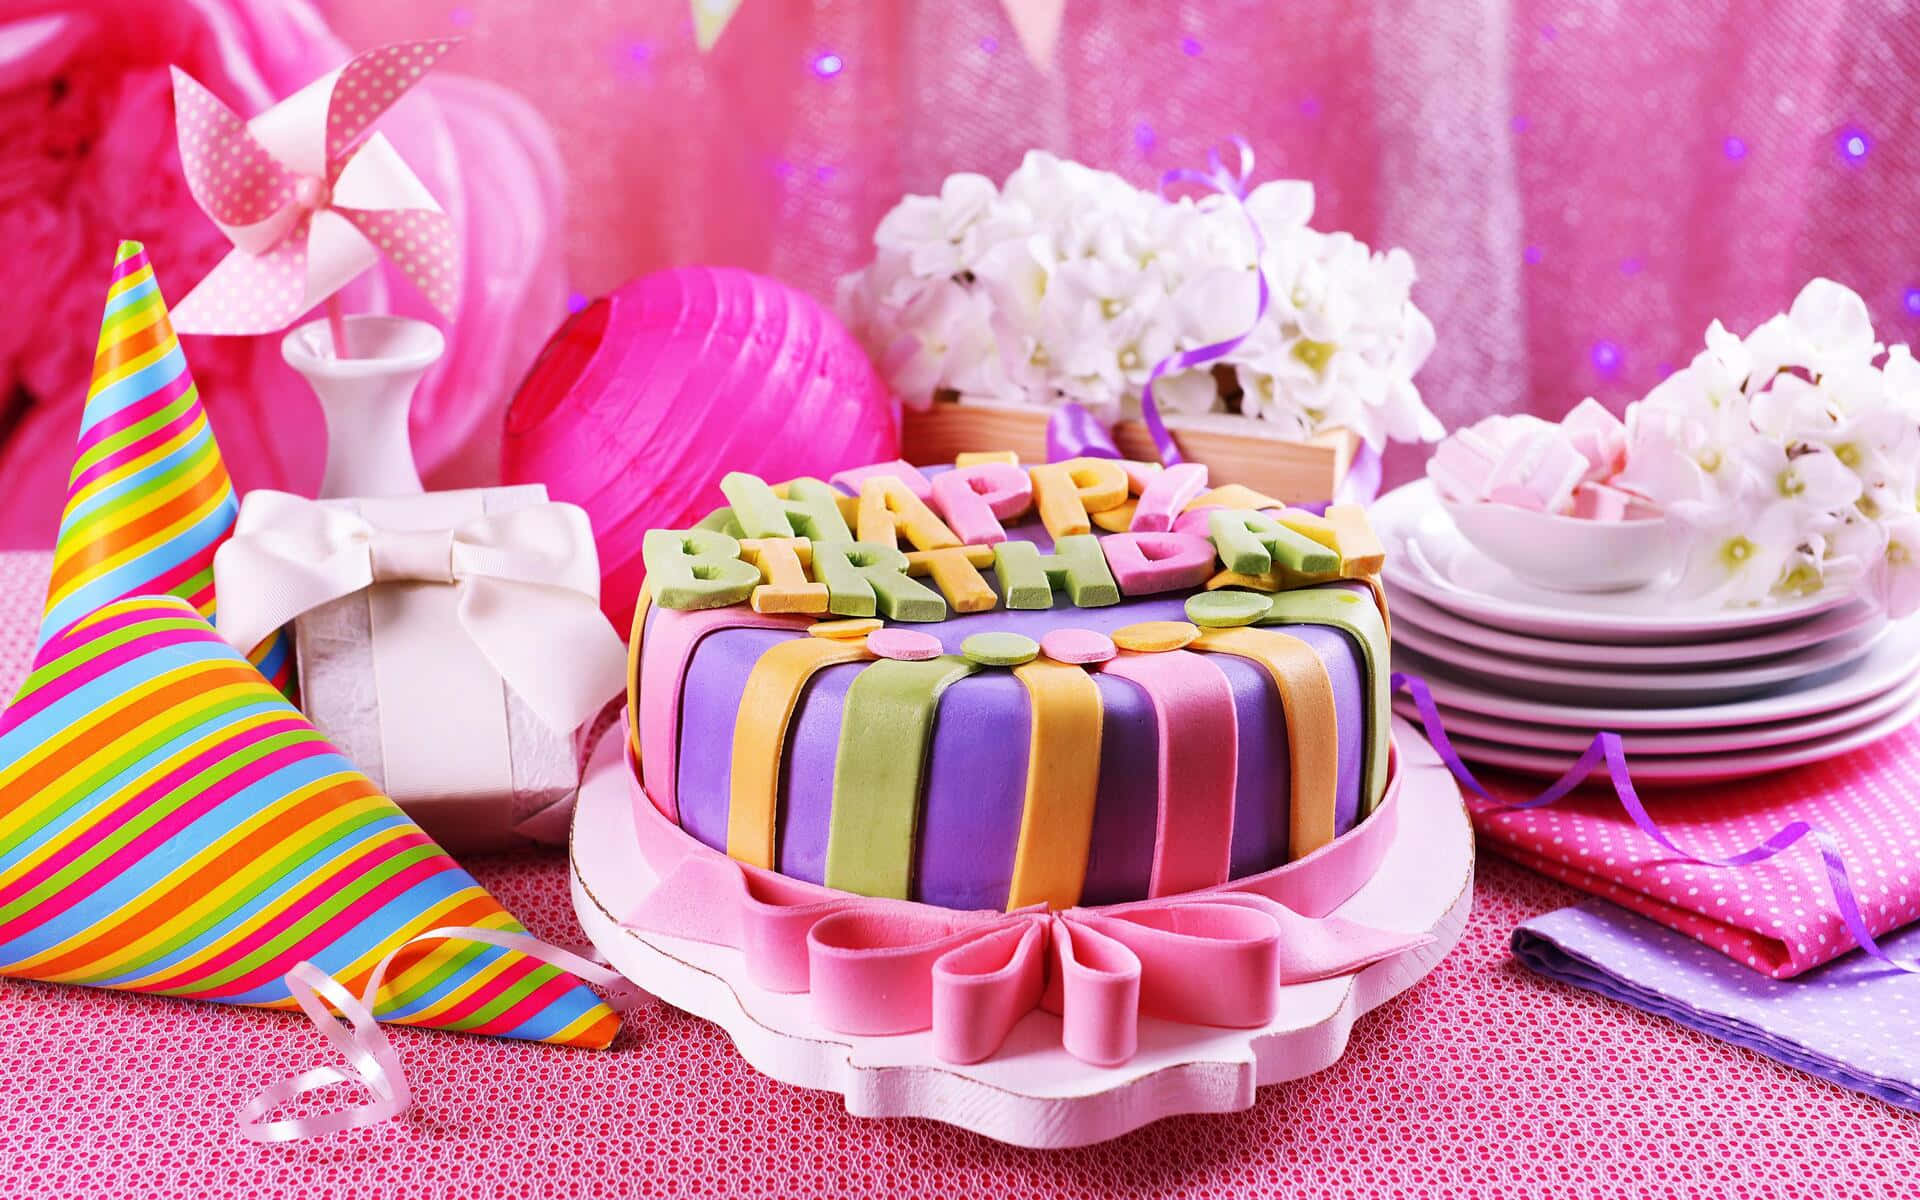 A perfect pink birthday! Wallpaper